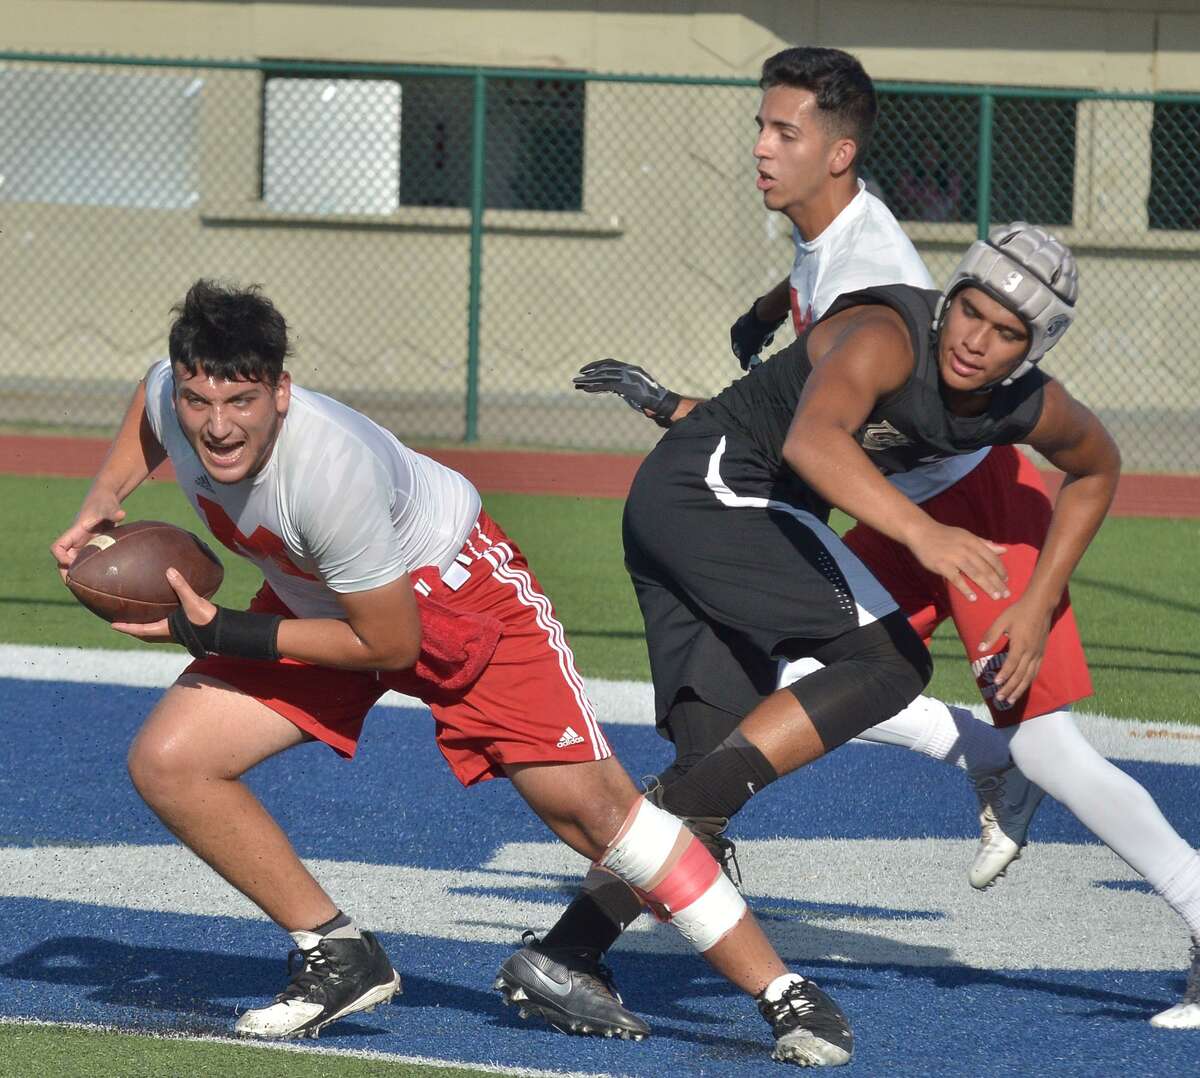 Martin improved to 6-0-1 with two wins on Wednesday during summer league 7on7 football at Krueger Field. The Tigers topped United South 34-19 before beating Cigarroa 31-0.